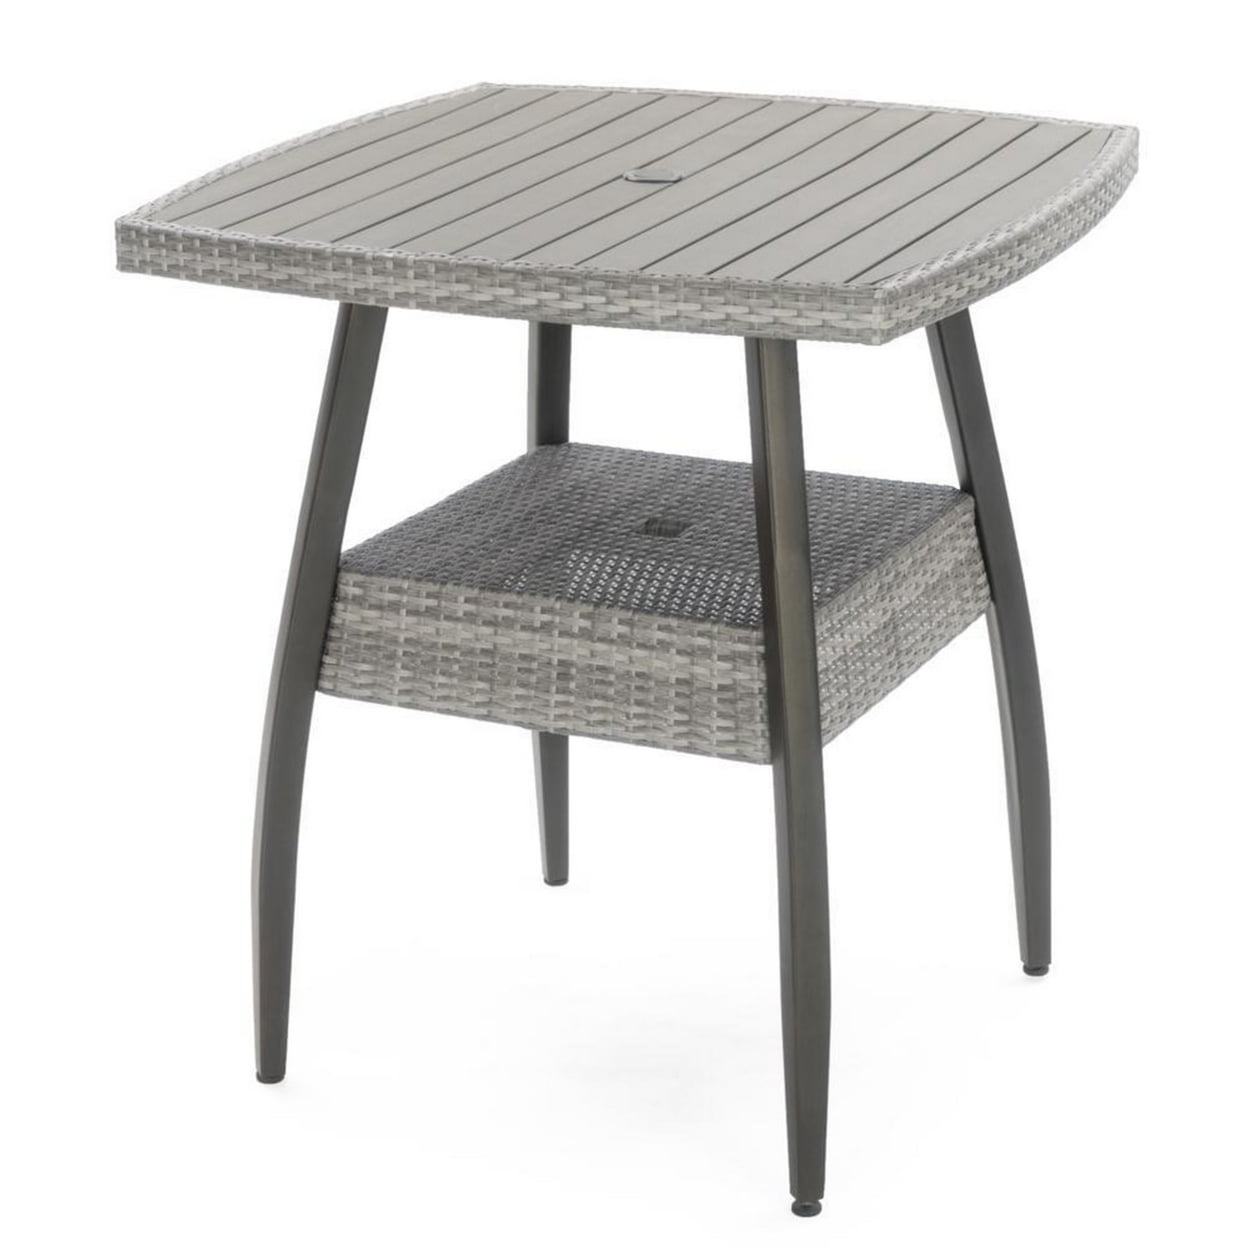 Picture of BenJara BM293712 38 in. Max Gray Faux Wood Frame Woven Resin Wicker Outdoor Bar Table